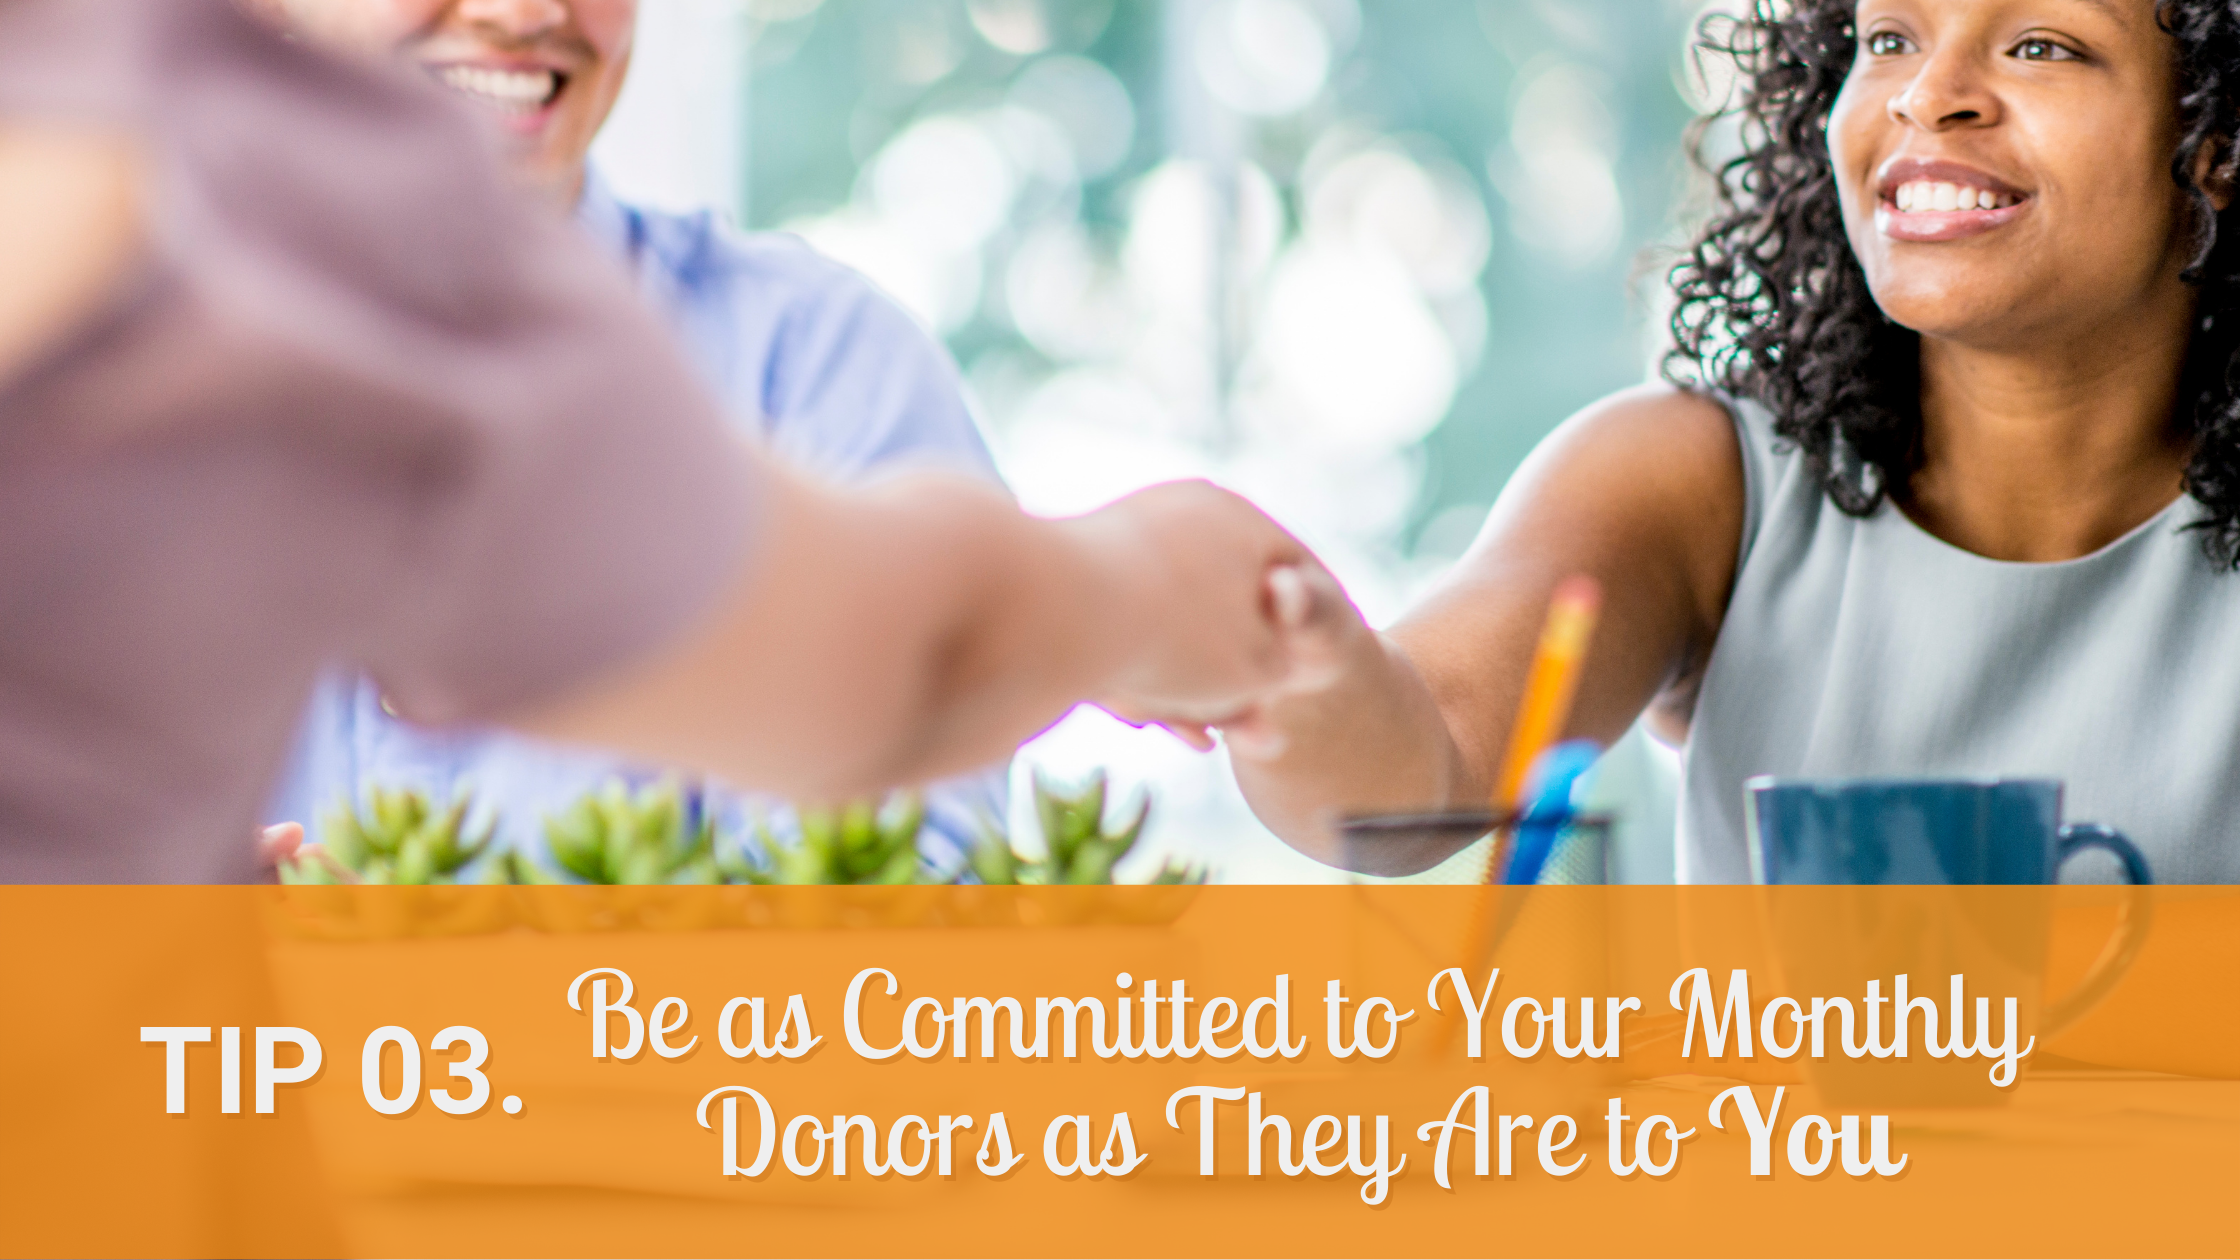 Top 10 Tips On How To Keep Your Monthly Donors_Tip3